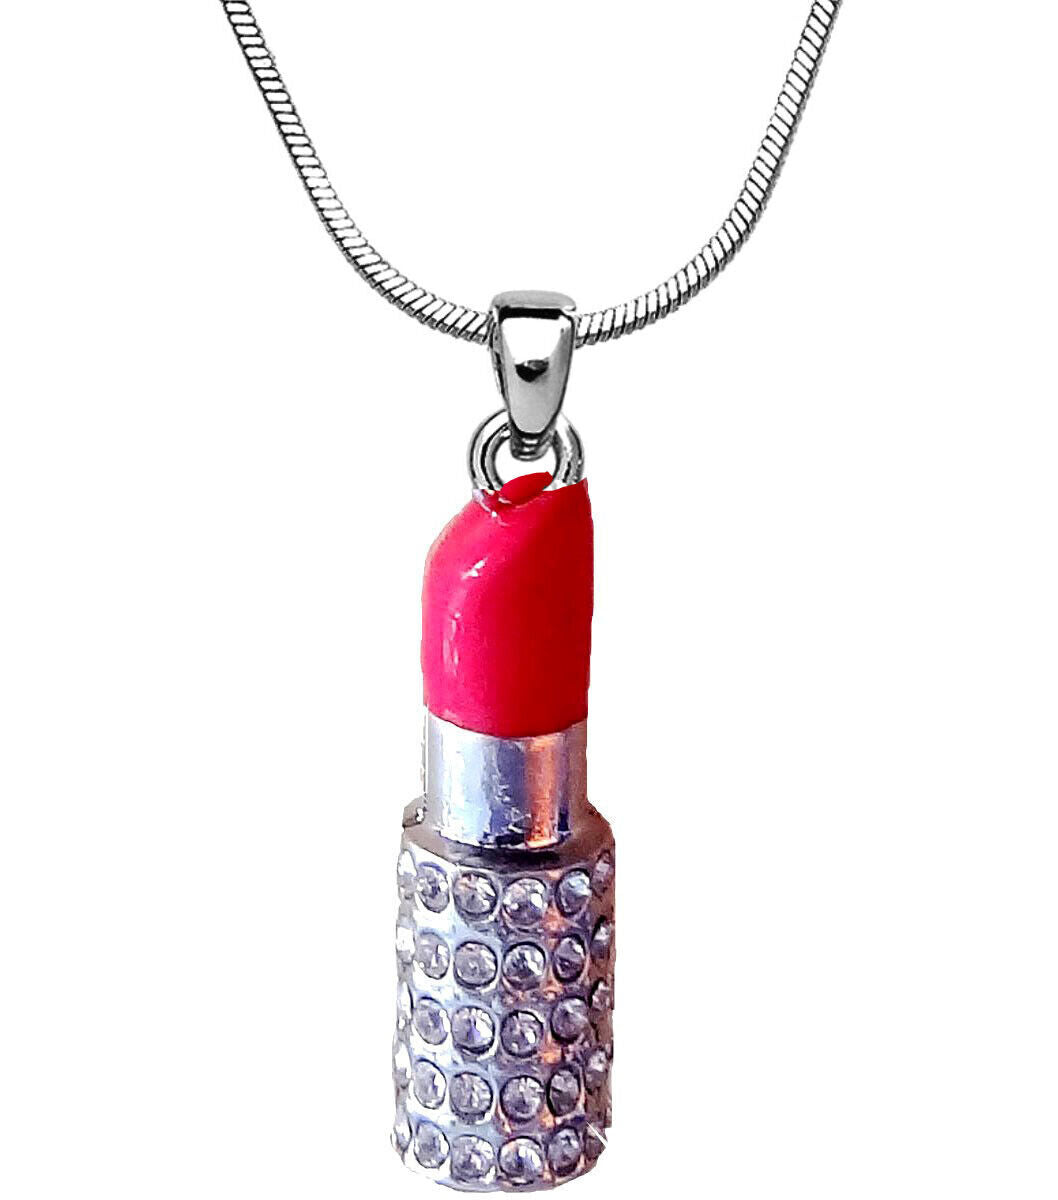 Silvertone Crystal Hot Pink Lipstick Pendant Necklace 17" Chain Fast Shipping